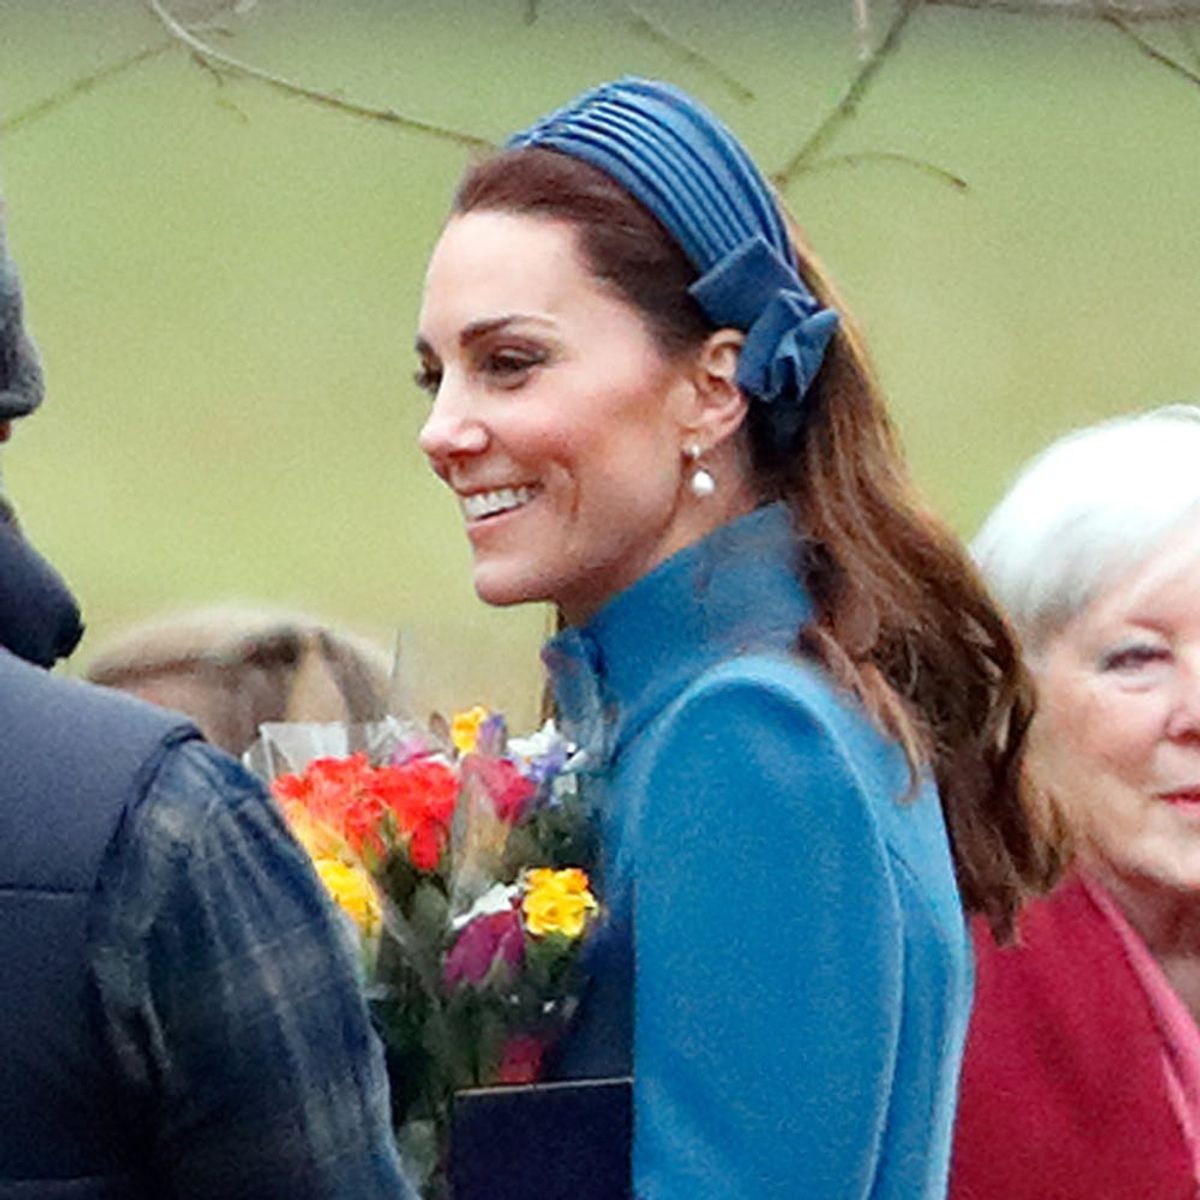 Kate Middleton Wore an Oversized Headband and Now We Want to Too